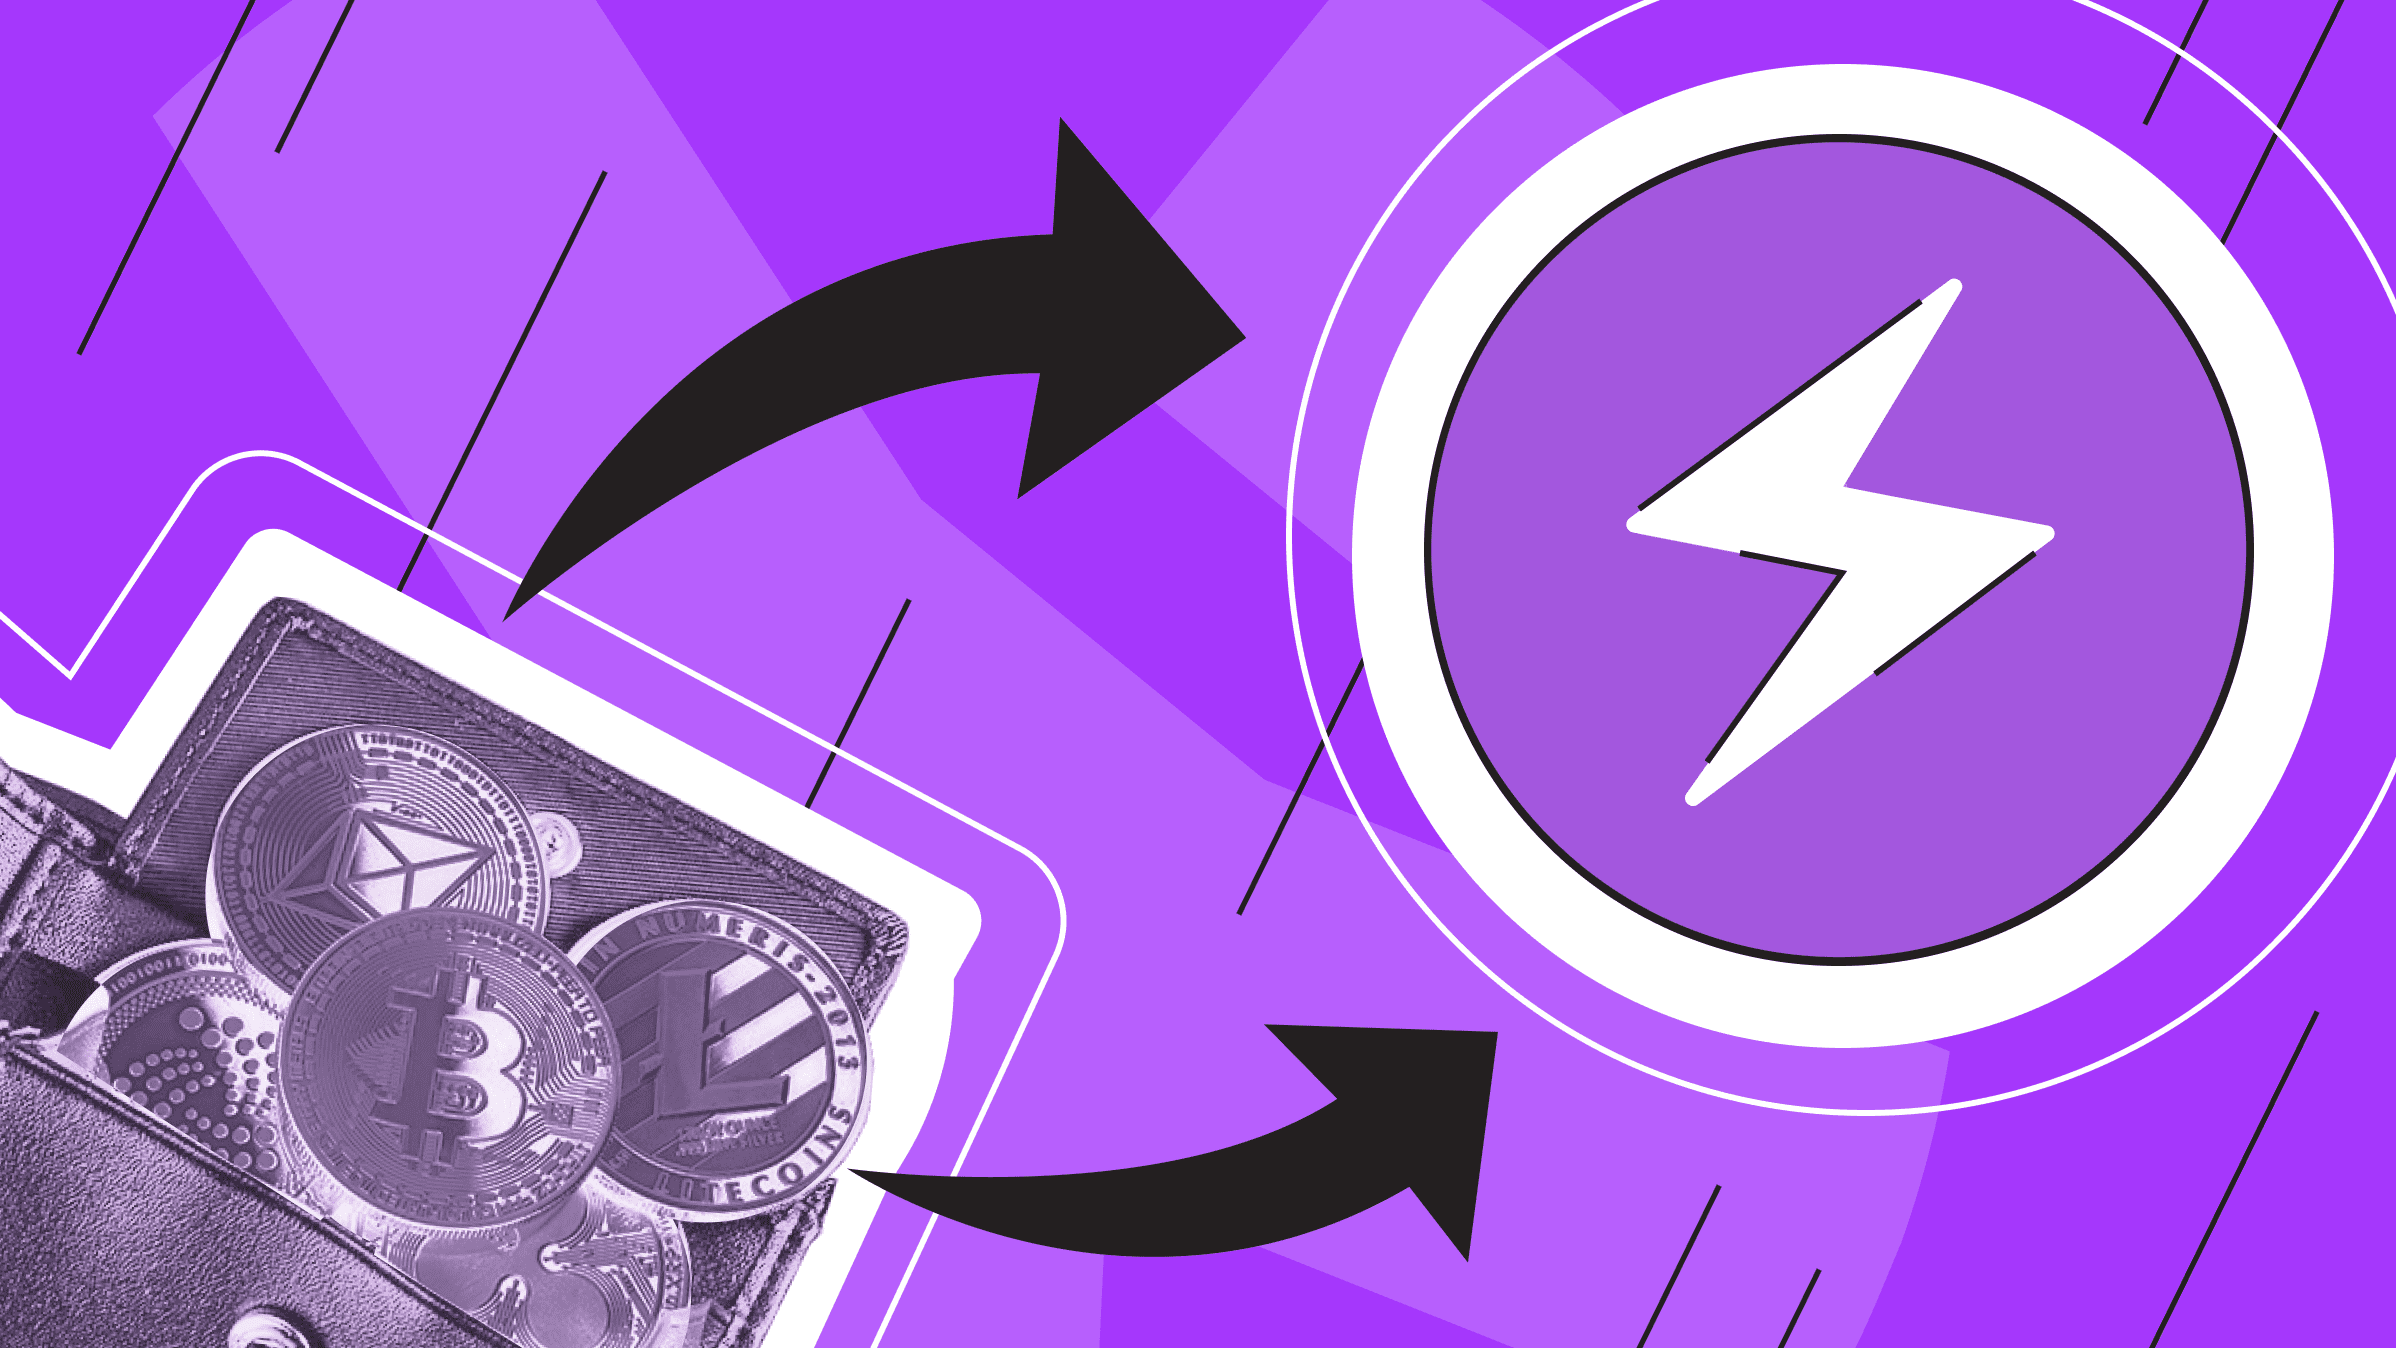 How to Make Money Using Lightning Network: What are Benefits and Risks